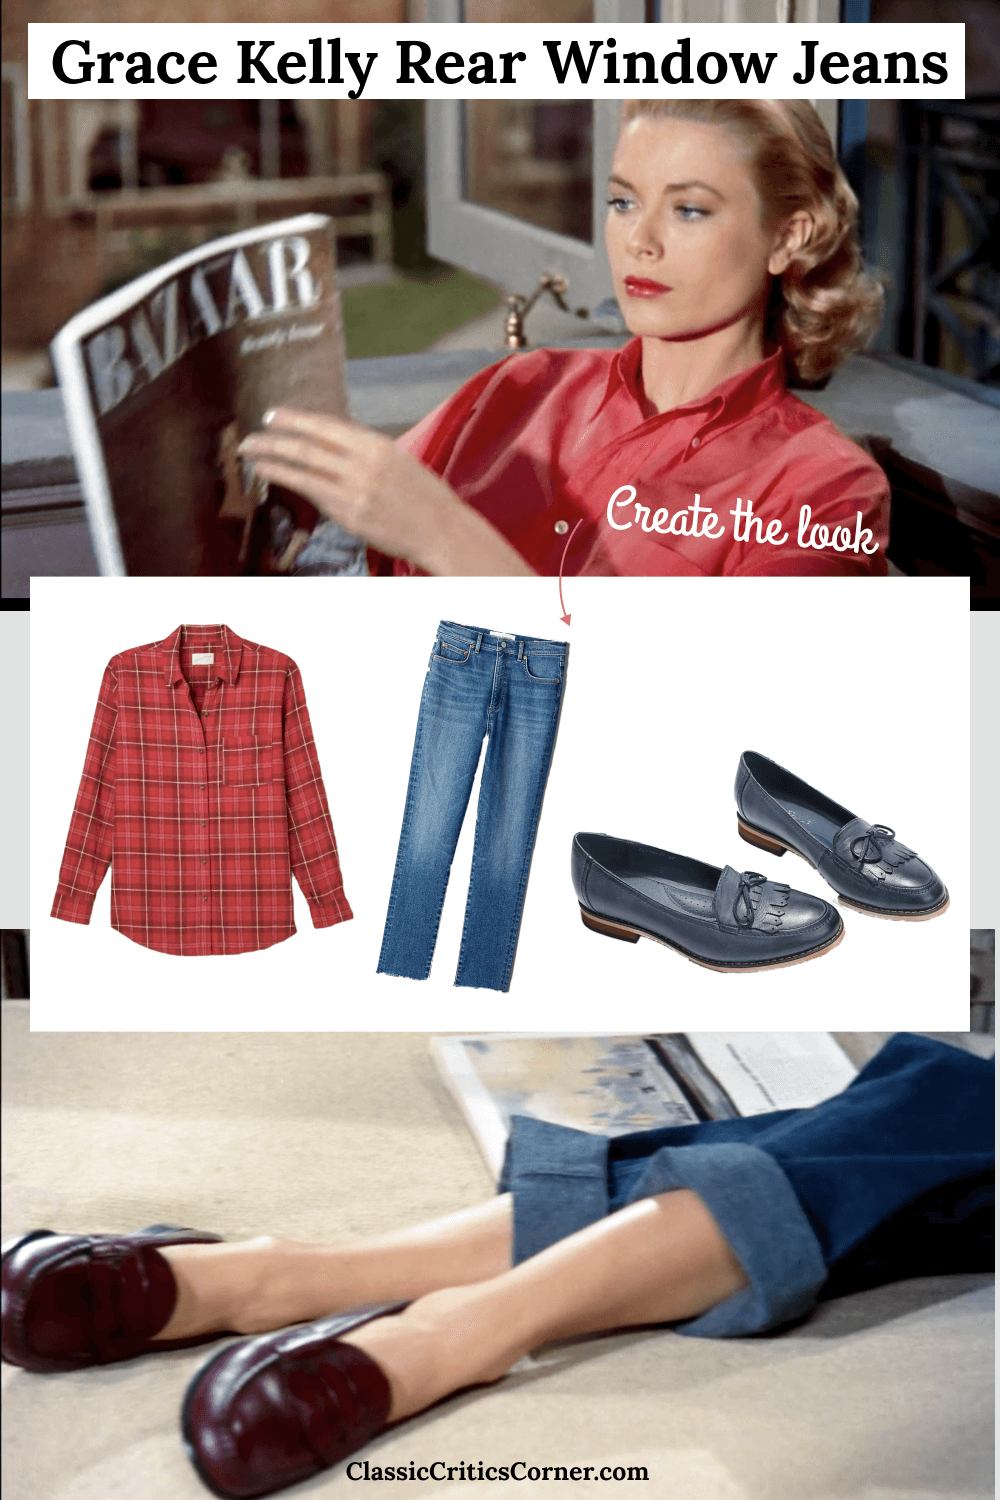 7 Chic Ways to Style Your Flat Mary Jane Shoes — Classic Critics Corner -  Vintage Fashion Inspiration including 1940s Fashion, 1950s Fashion and Old  Hollywood Glam icons like Grace Kelly, Audrey